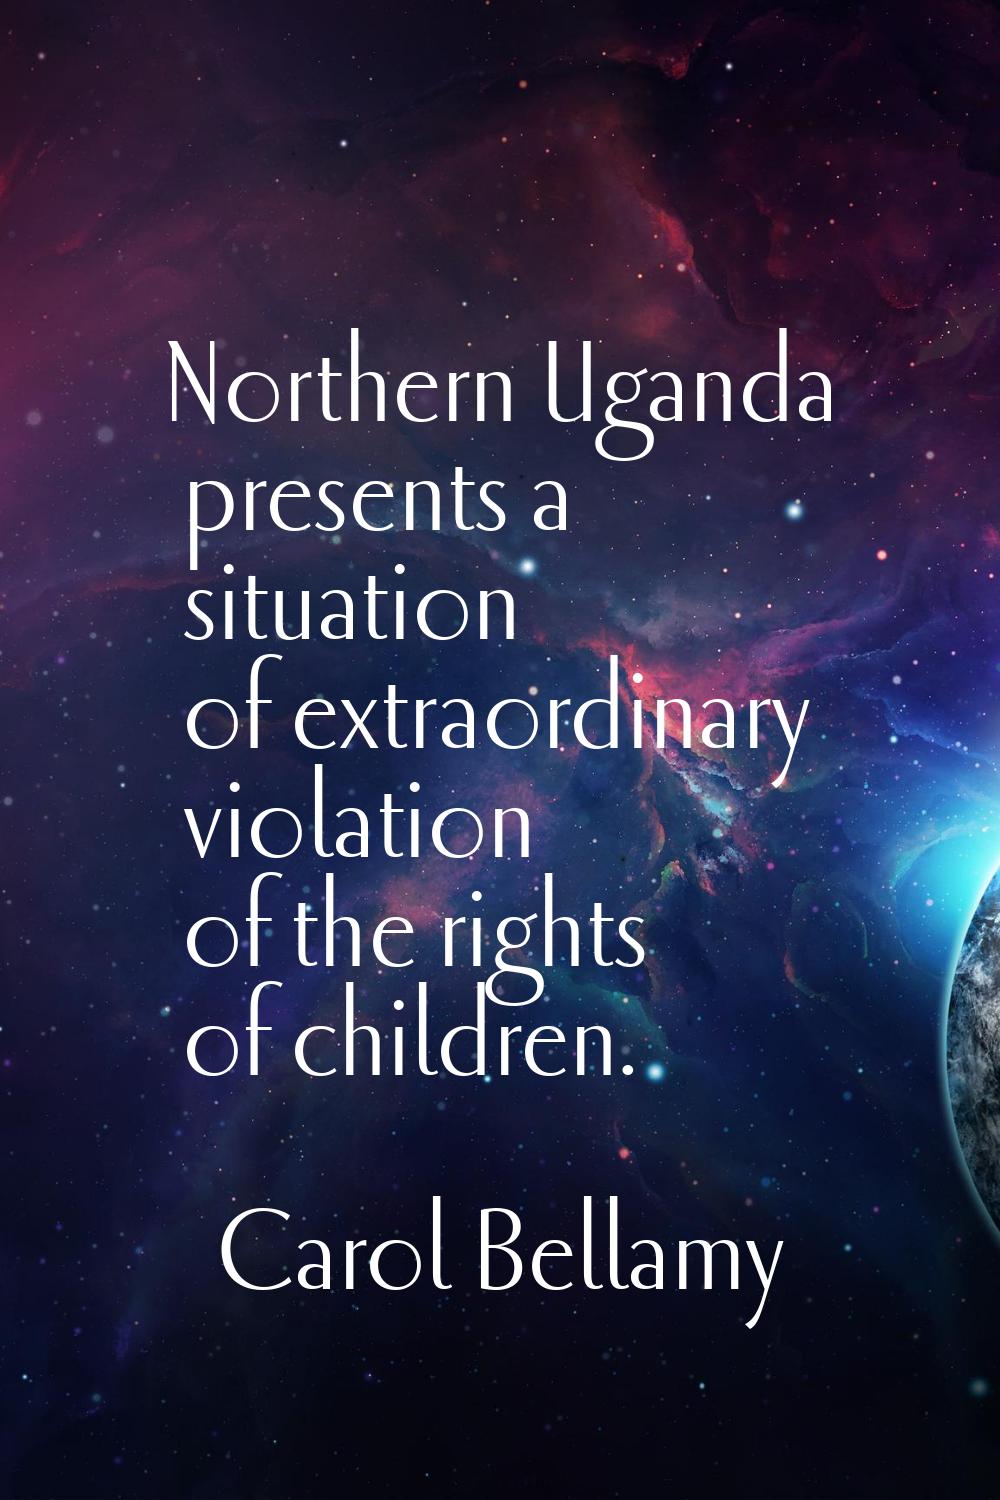 Northern Uganda presents a situation of extraordinary violation of the rights of children.